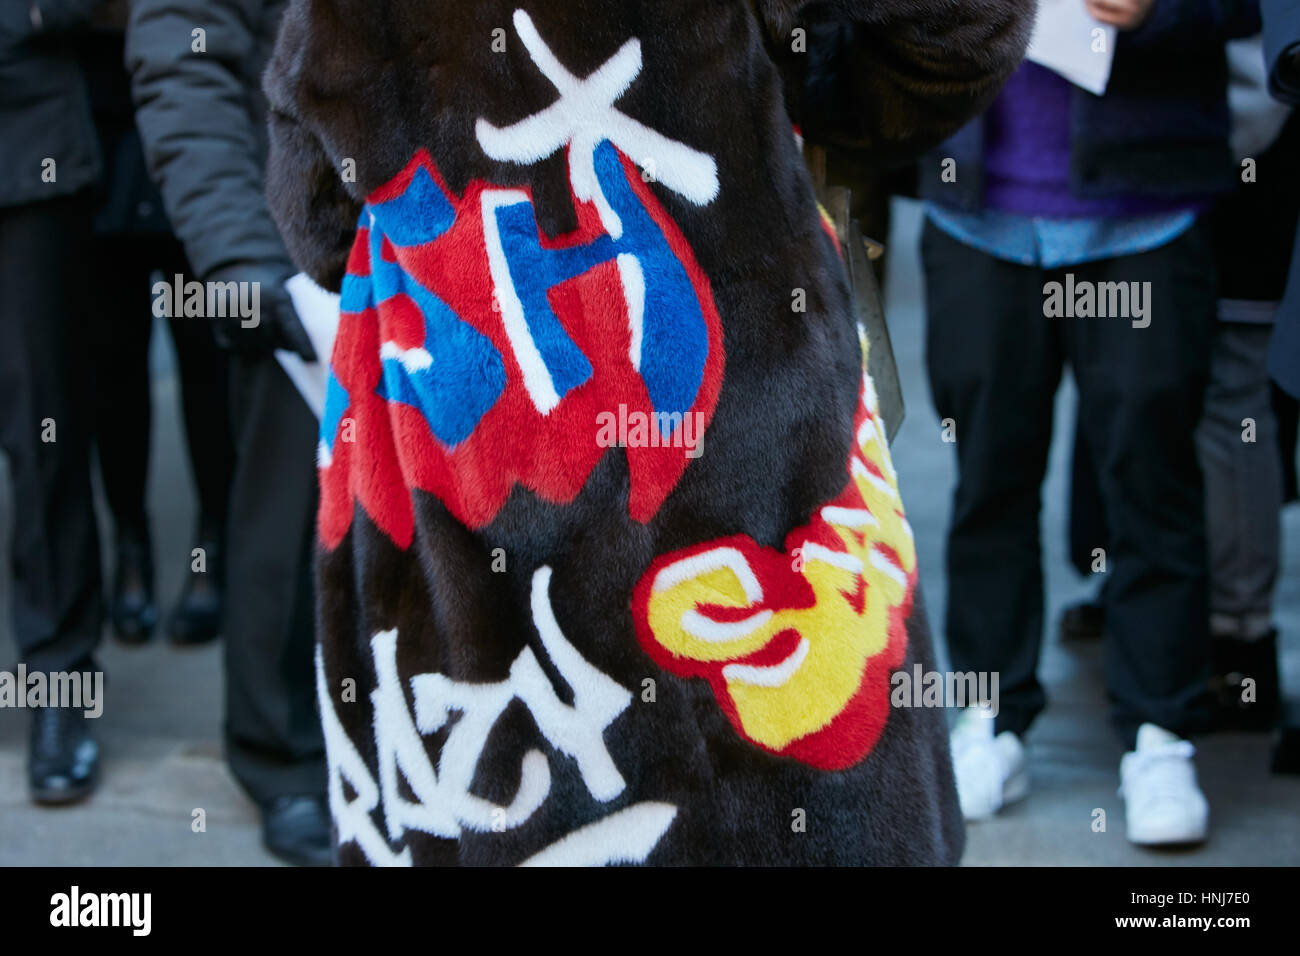 Woman with brown fur coat with writers colorful design before N 21 fashion show, Milan Fashion Week street style on January 16, 2017. Stock Photo